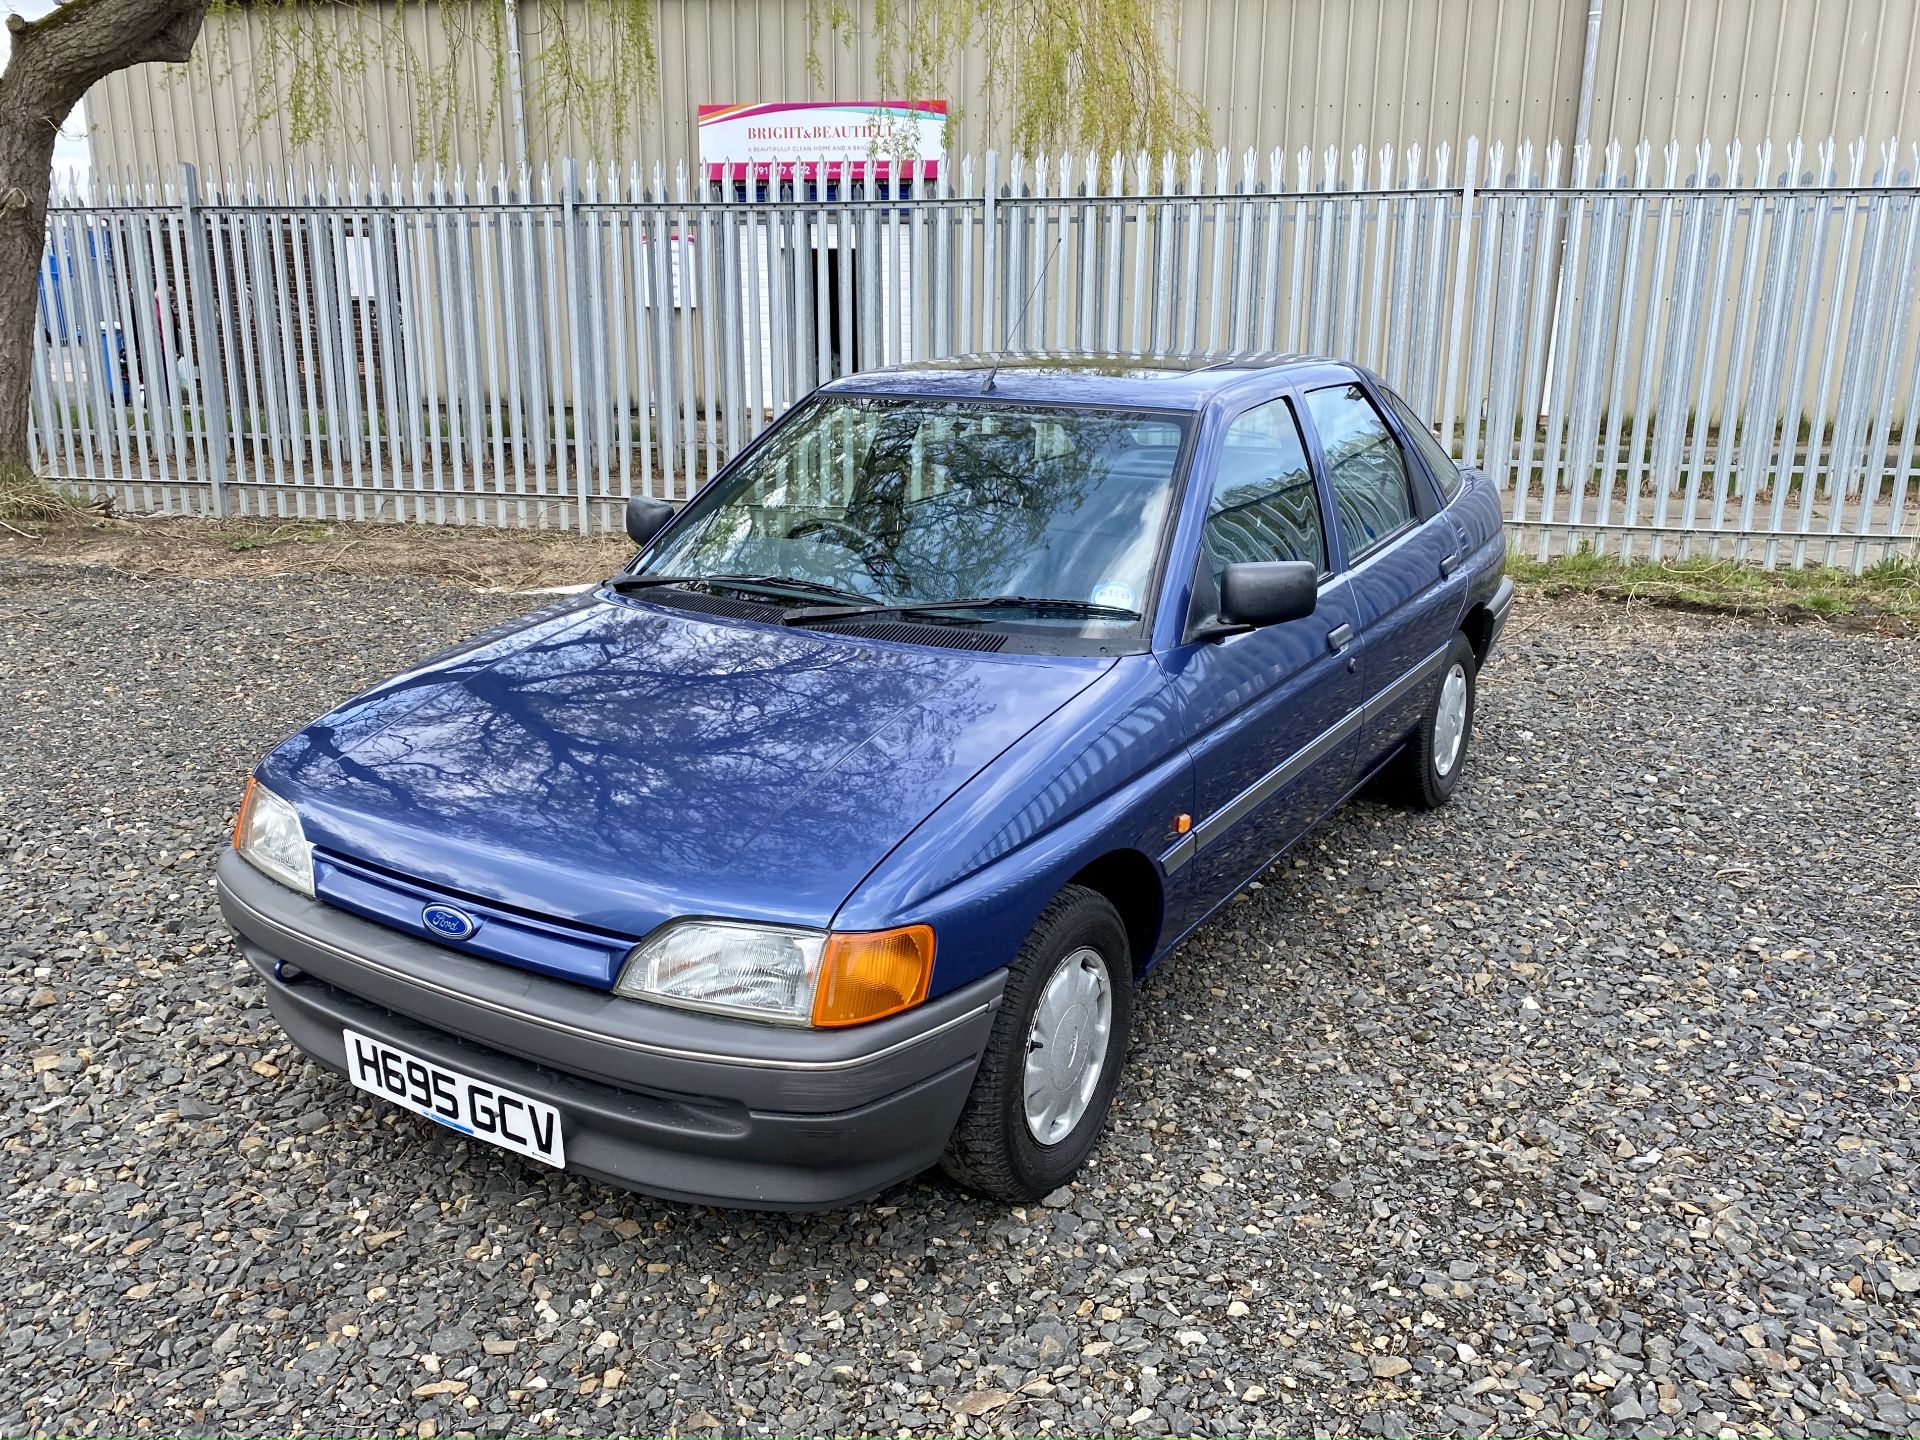 Ford Escort LX1.4 - Image 19 of 54